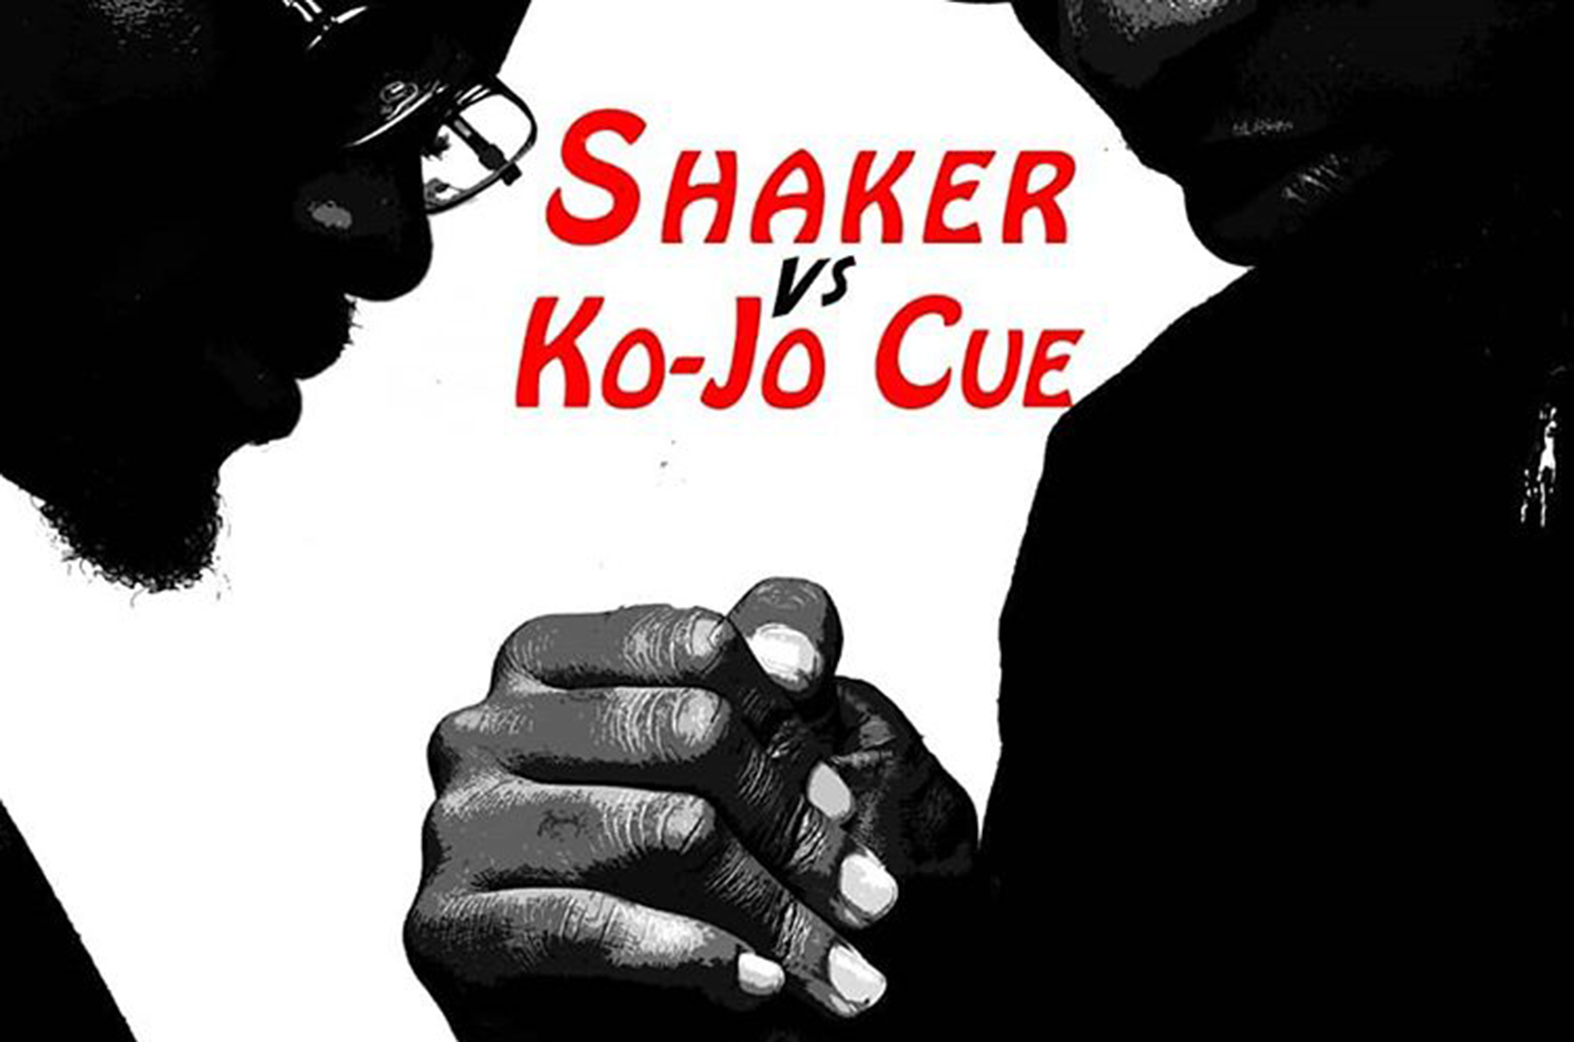 Shaker & Ko-Jo Cue joint concert on 26th October